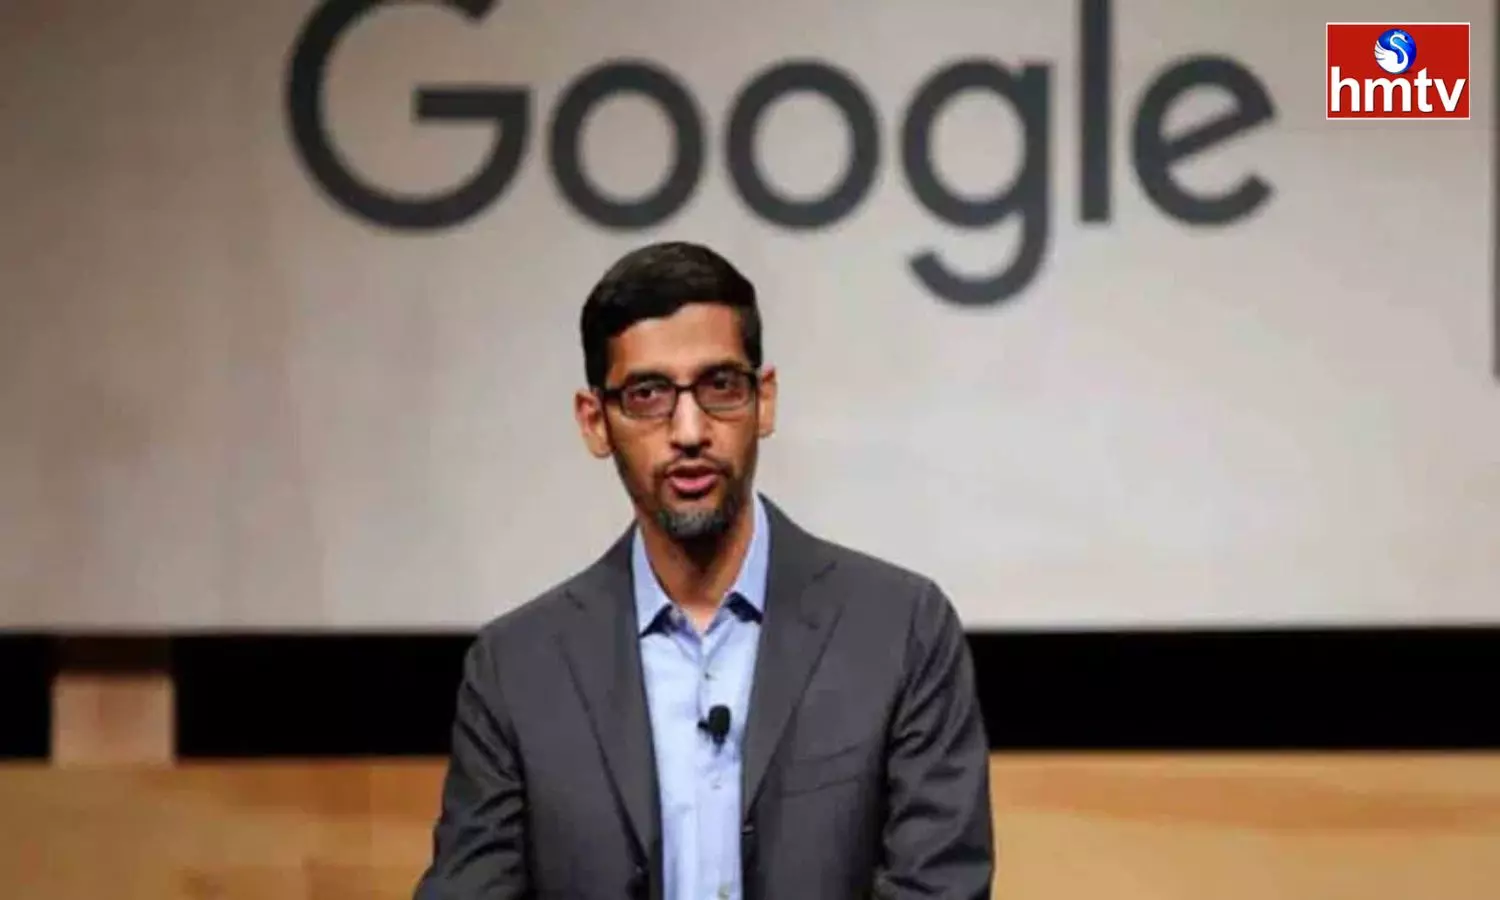 20-year Relationship With Google Sundar Pichai Made An Emotional Post